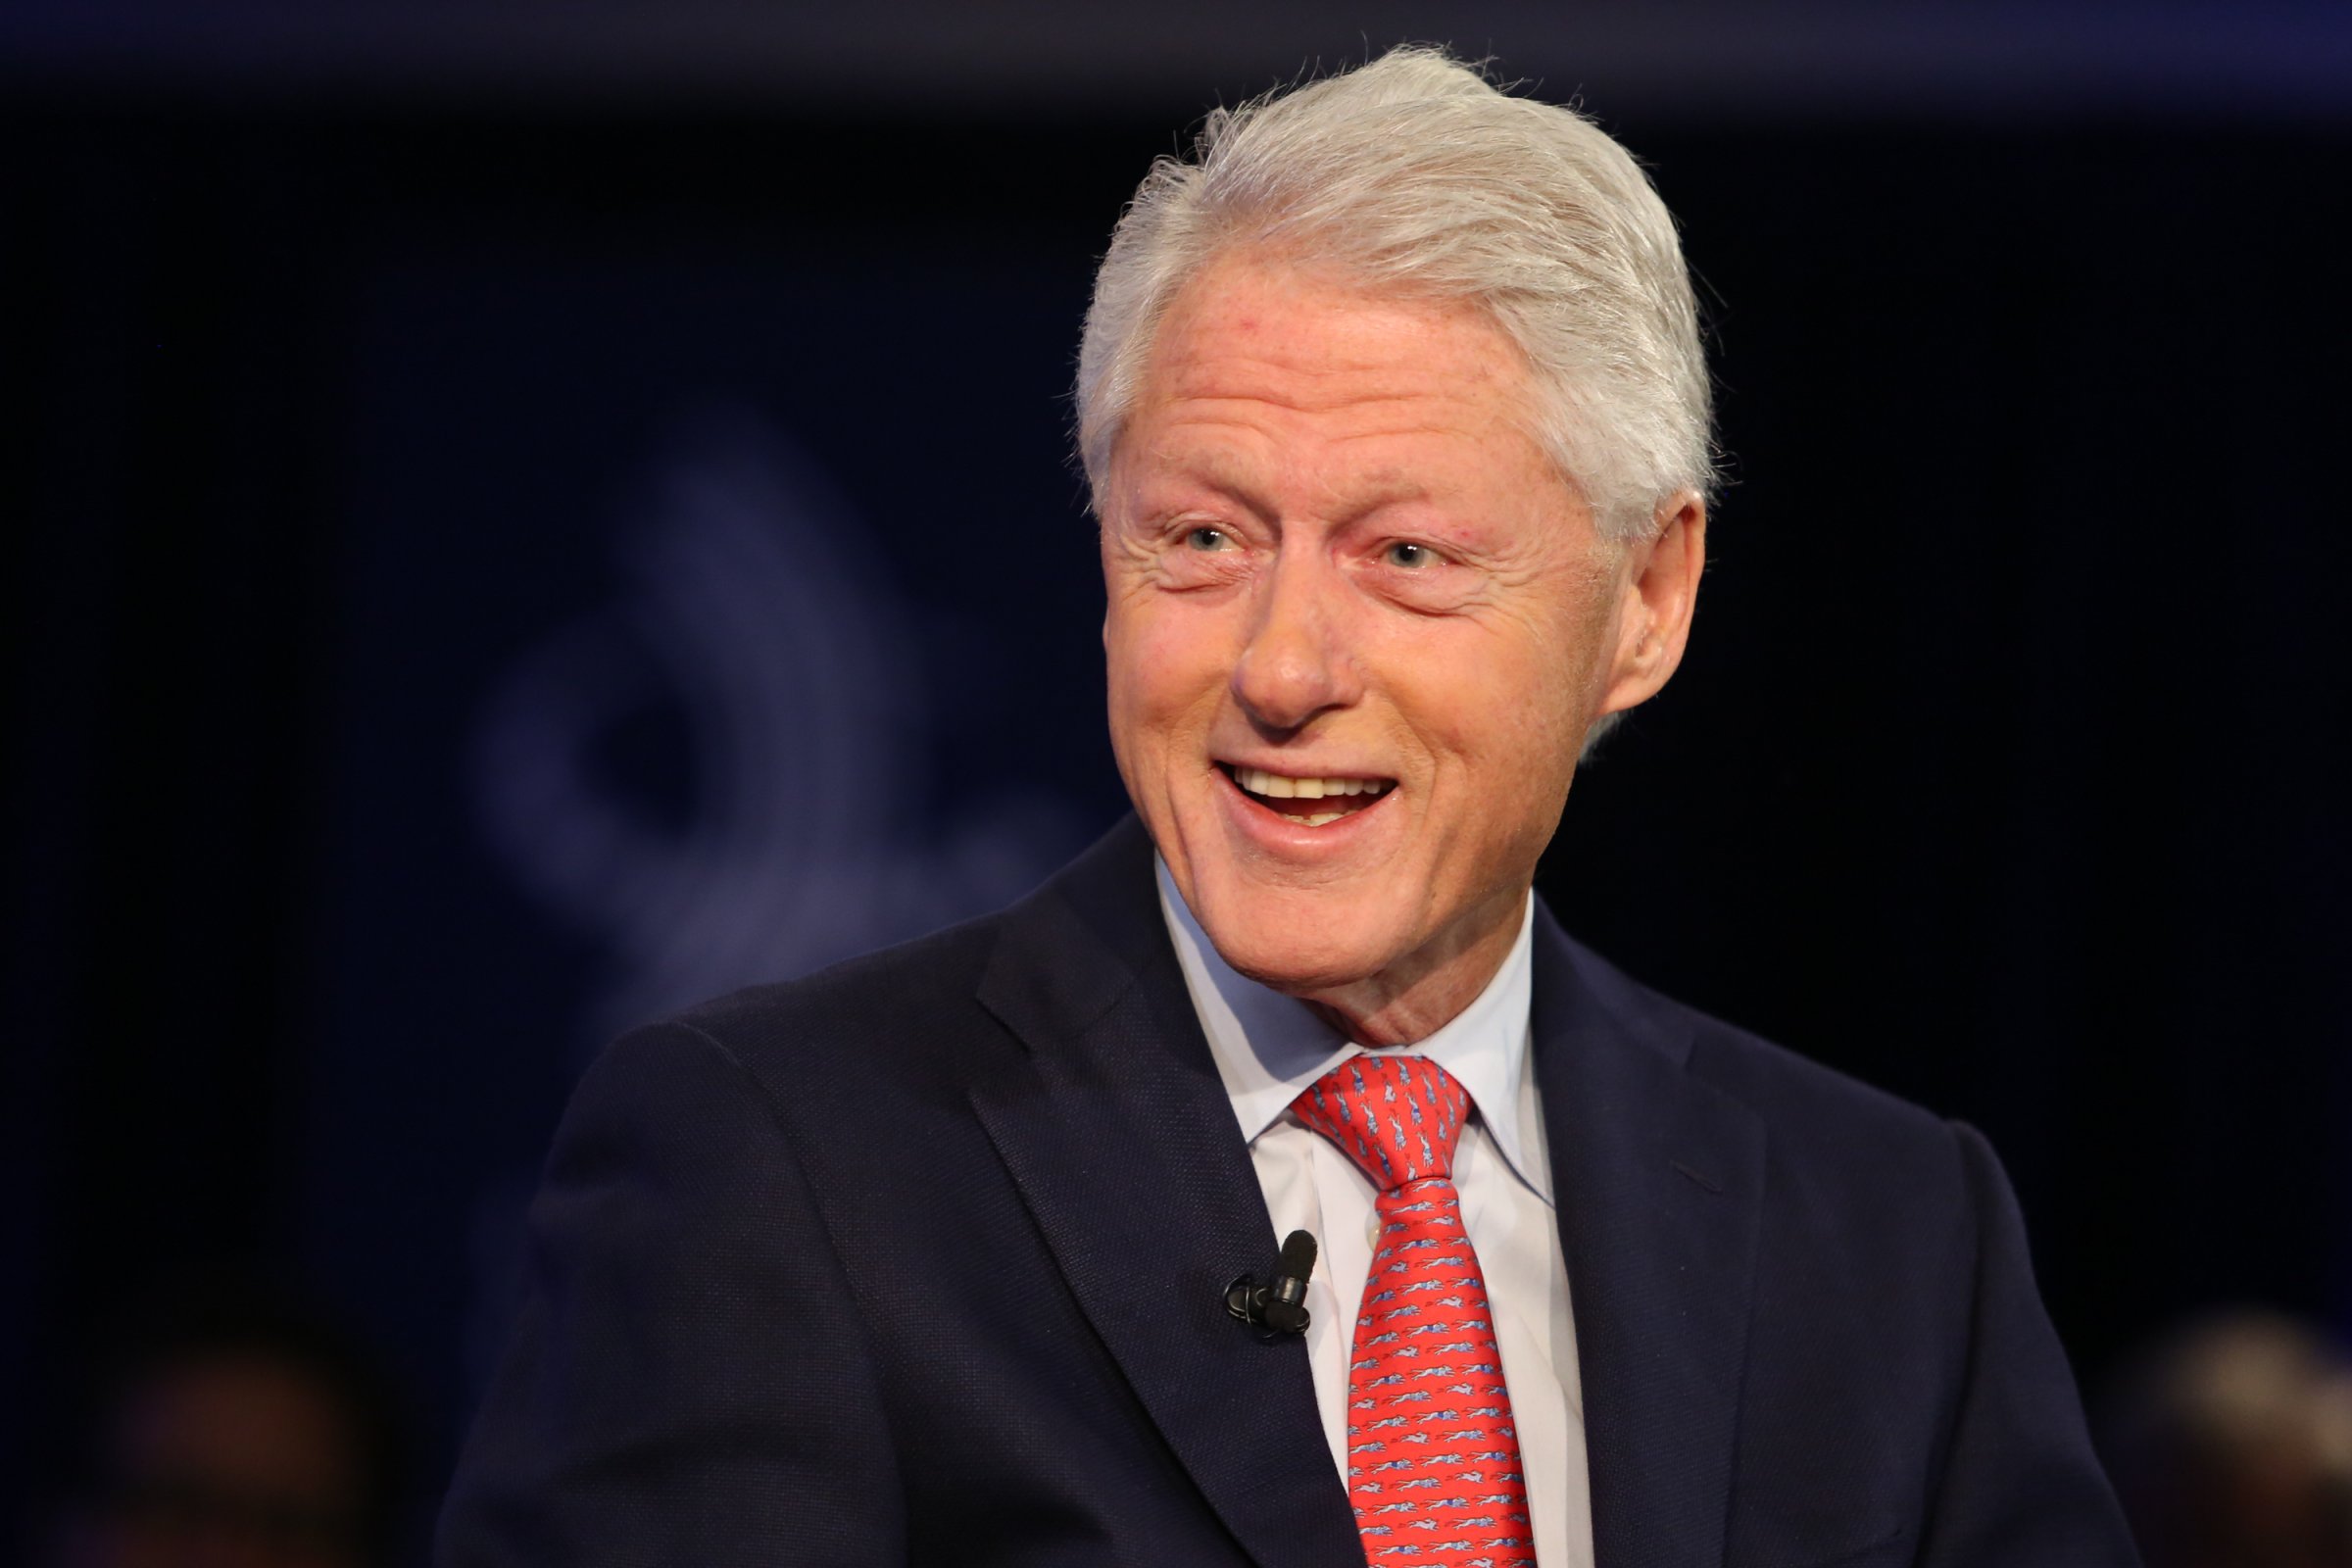 Bill Clinton speaks at an interview, during the Clinton Global Initiative Annual Meeting, in New York City on Sept. 28, 2015.